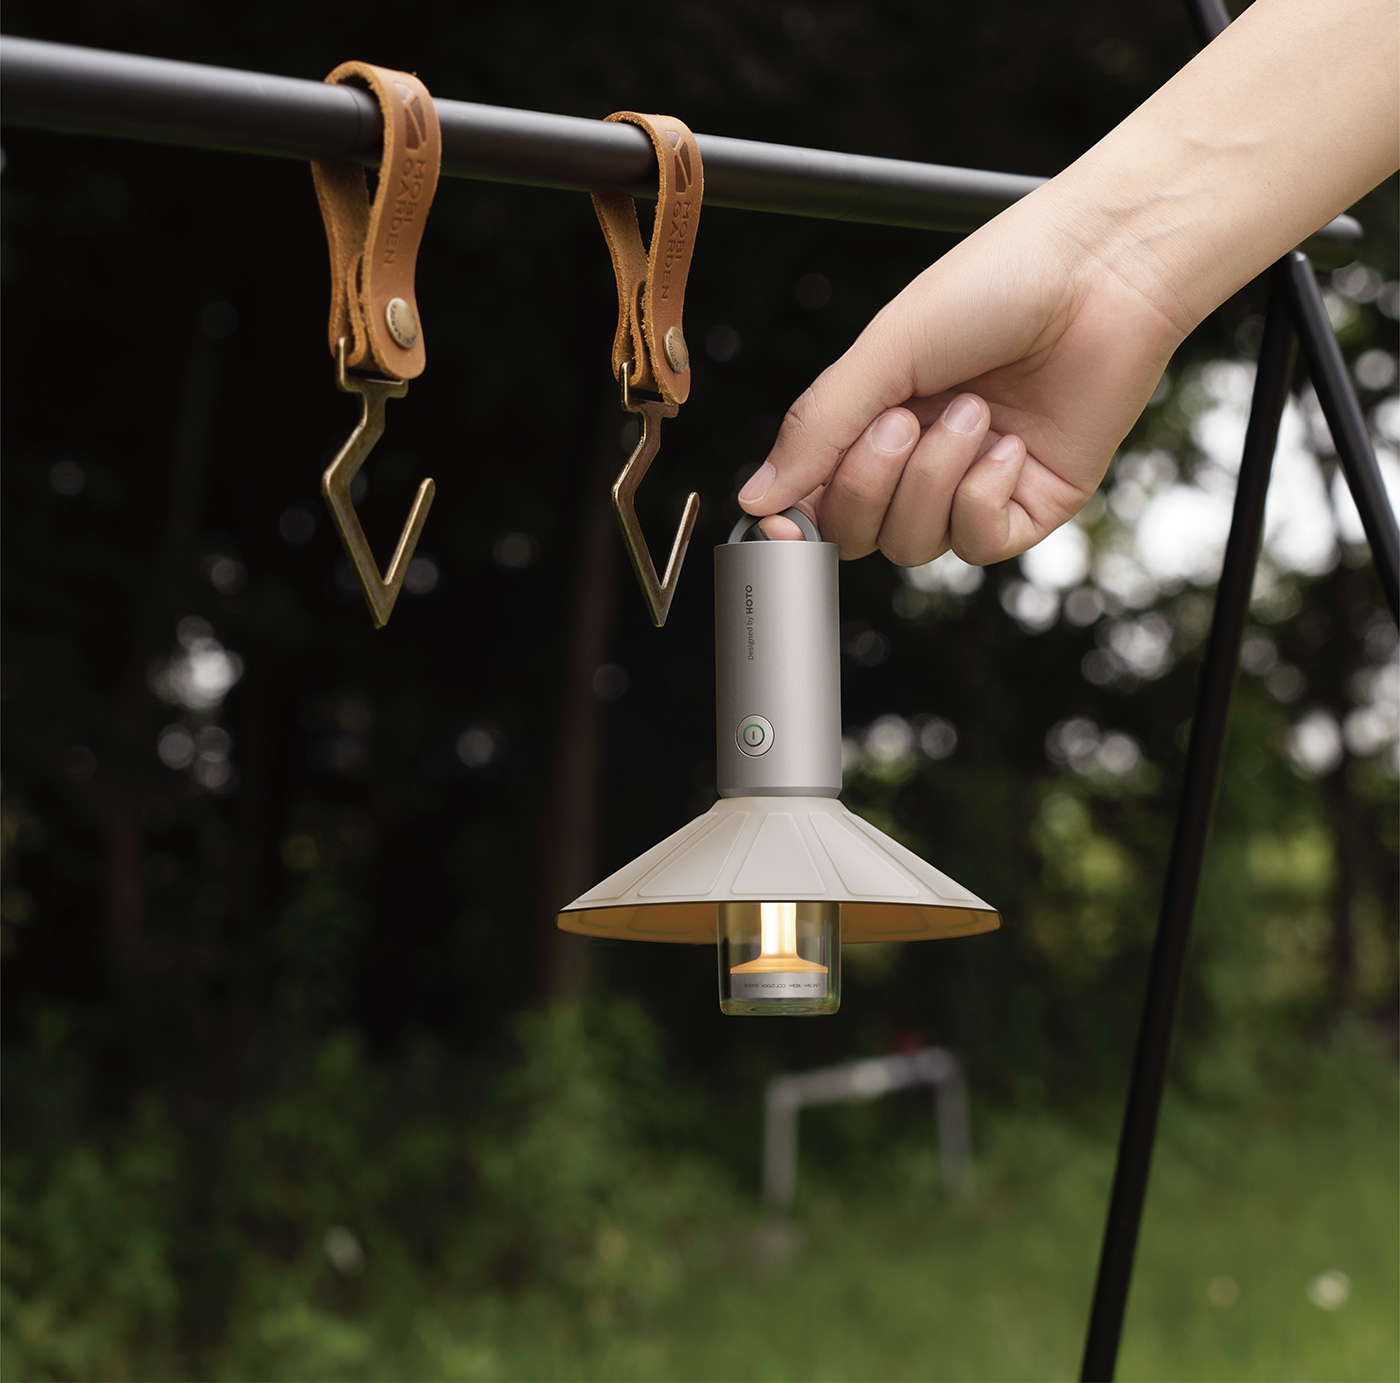 Ambient camping flashlight hiking industrial design  Lamp lantern light Outdoor product design 